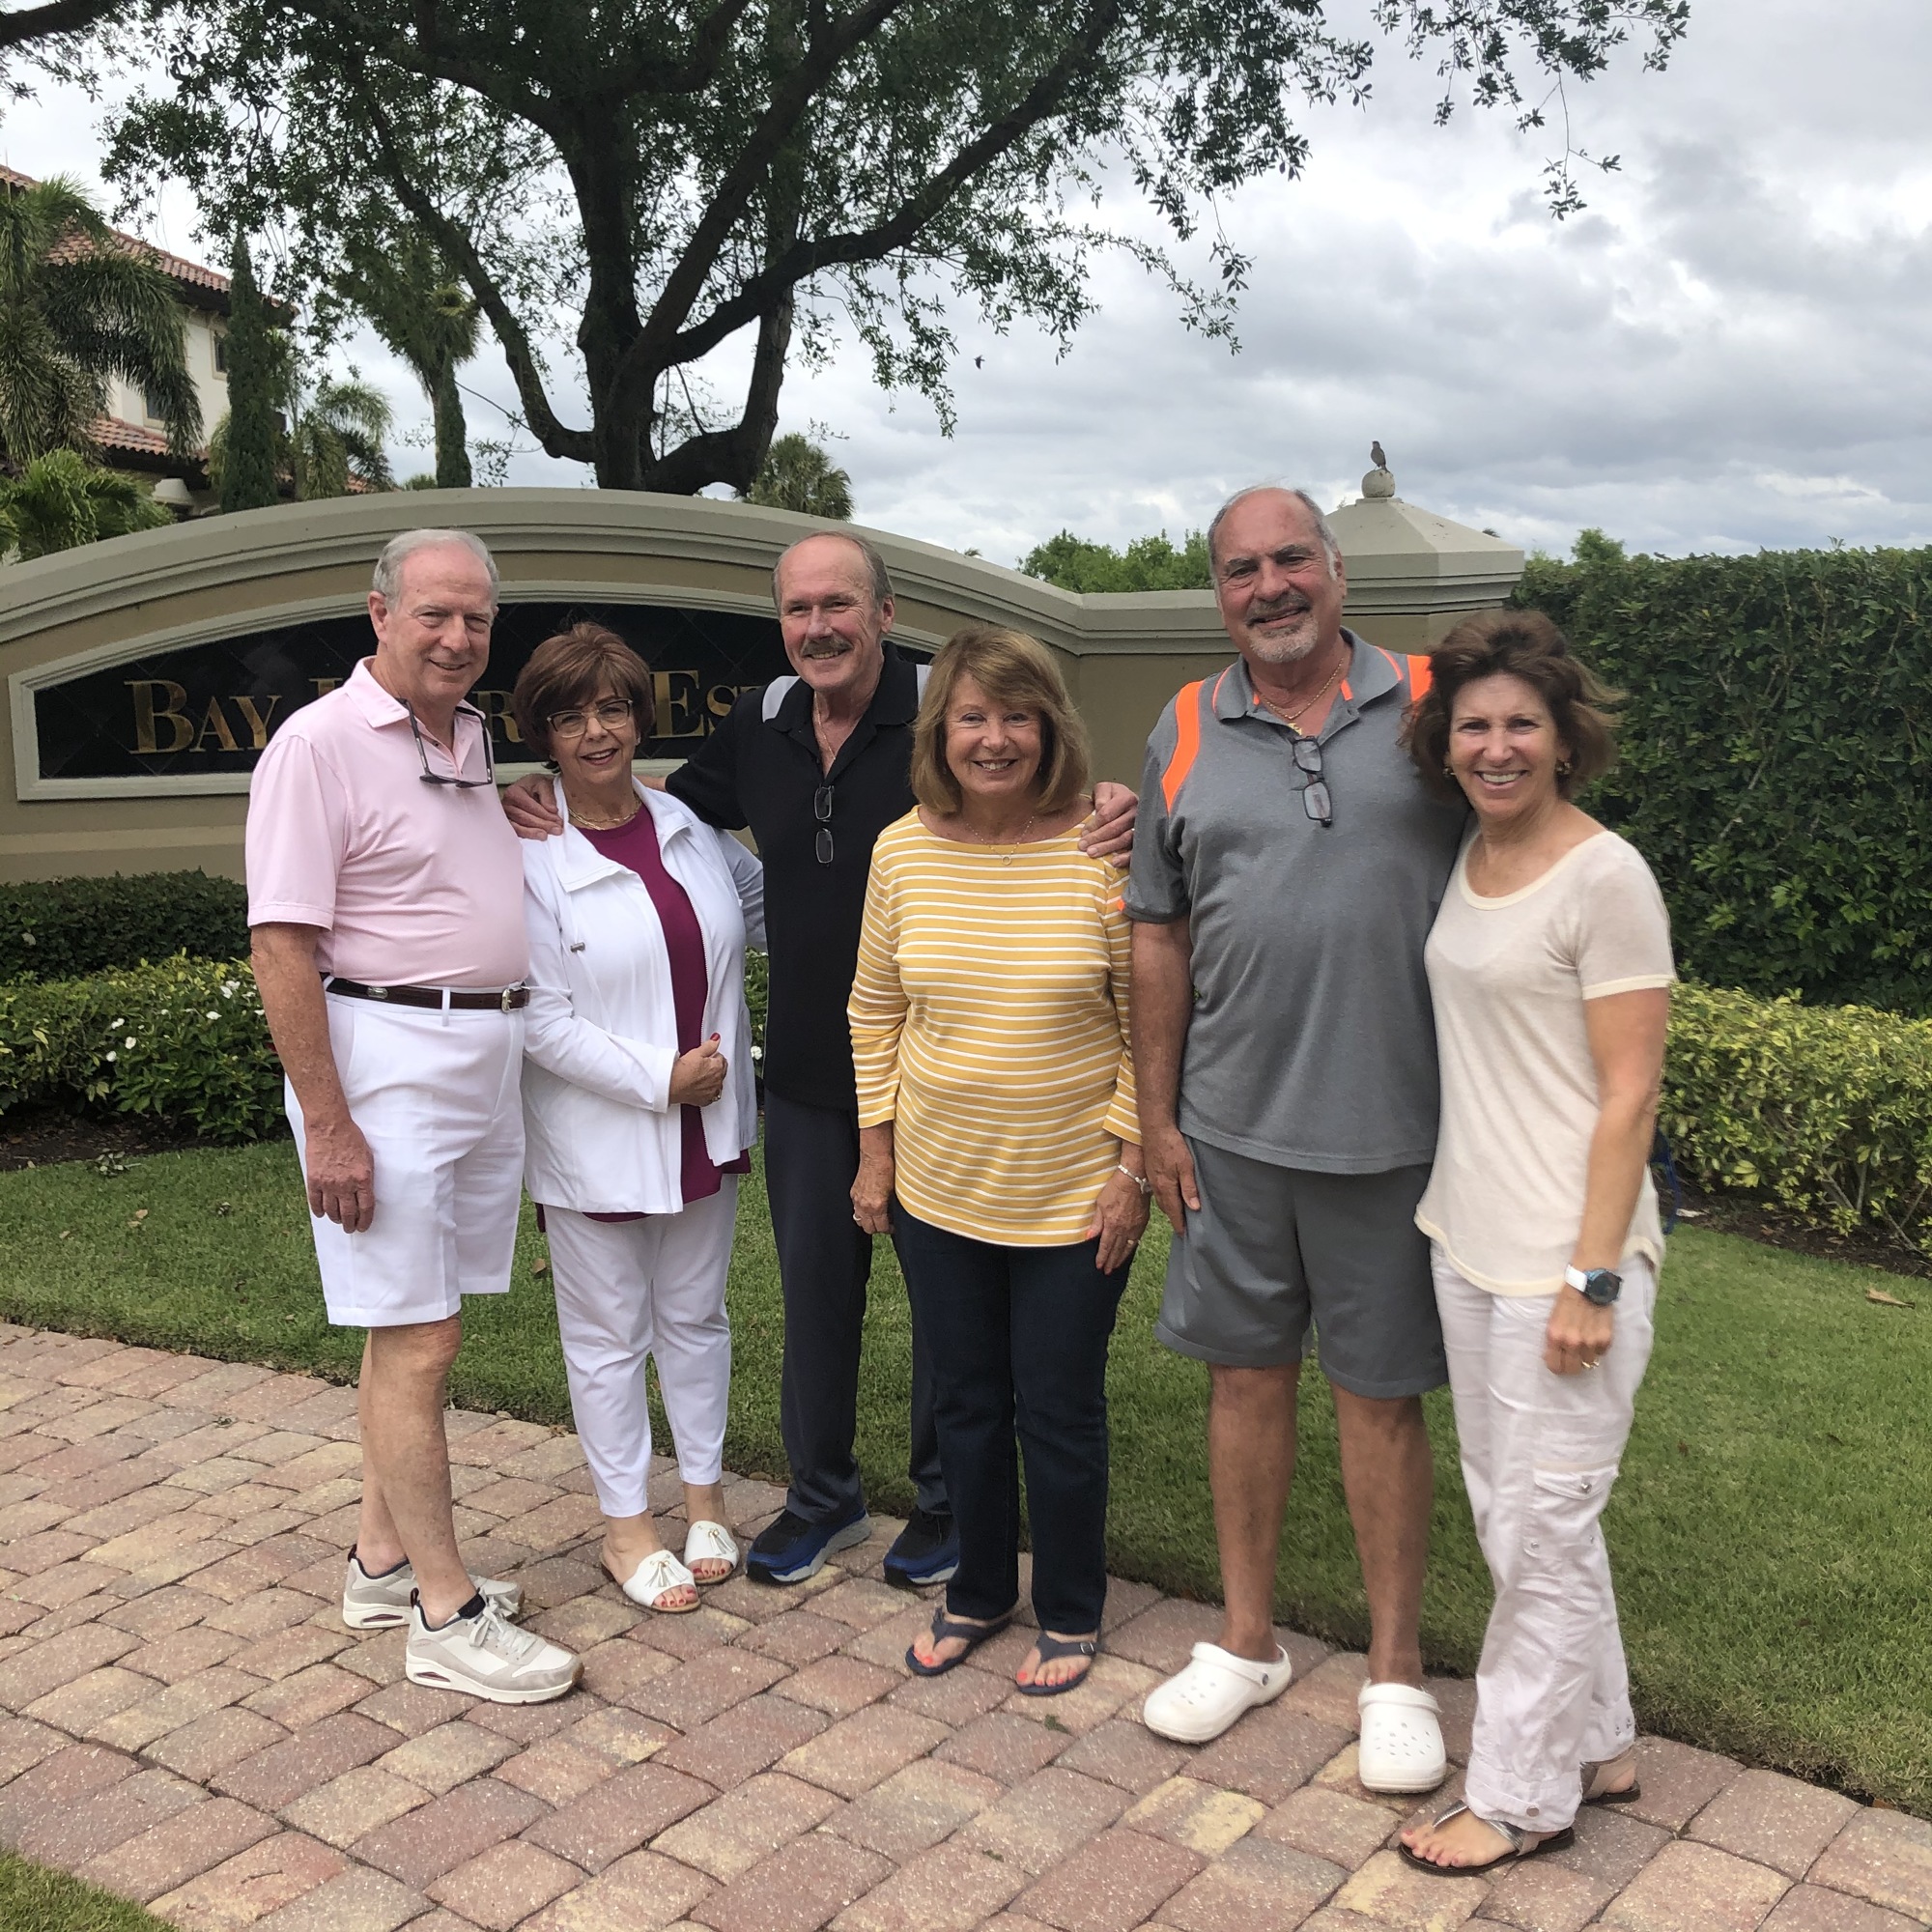 Ira Kirsch, Jane Kirsch, John Joly, Regina Joly, Aris Kaplanis and Marcia Kaplanis gather in Naples after all received their second dose of COVID-19 vaccine. For the first time in 40 years, they did not see one another in 2020.